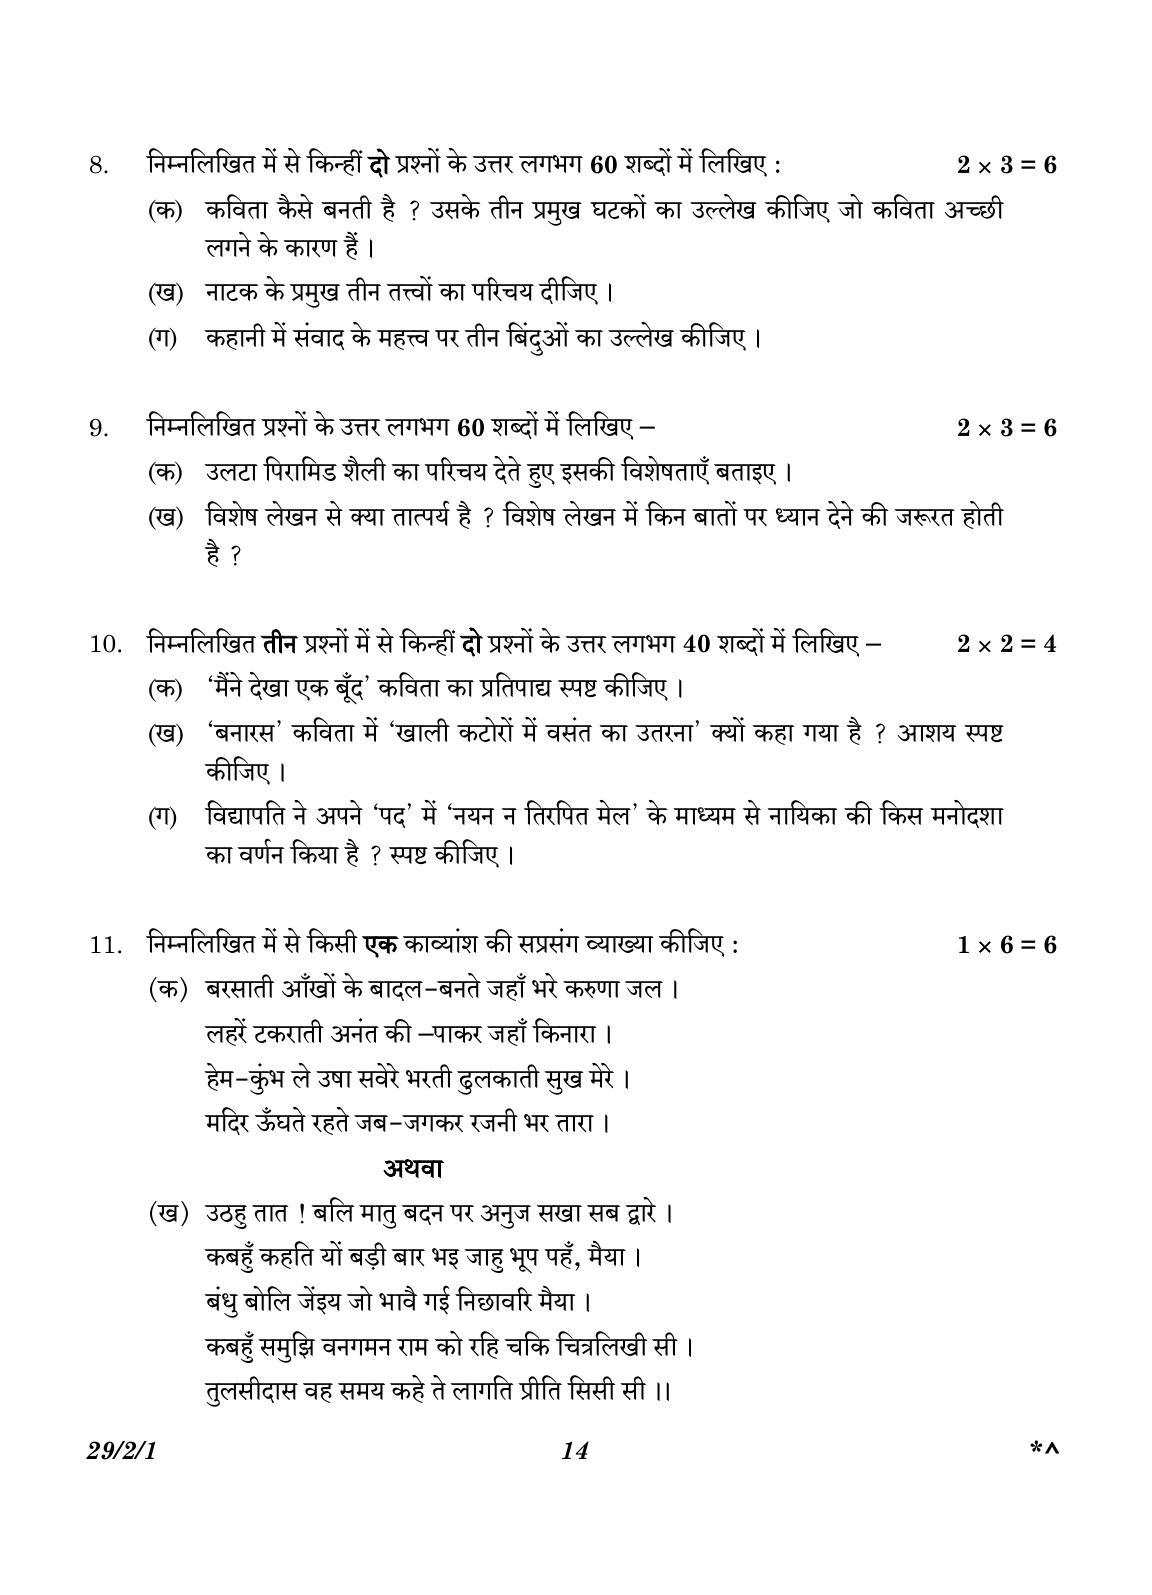 CBSE Class 12 29-2-1 Hindi Elective 2023 Question Paper - Page 14